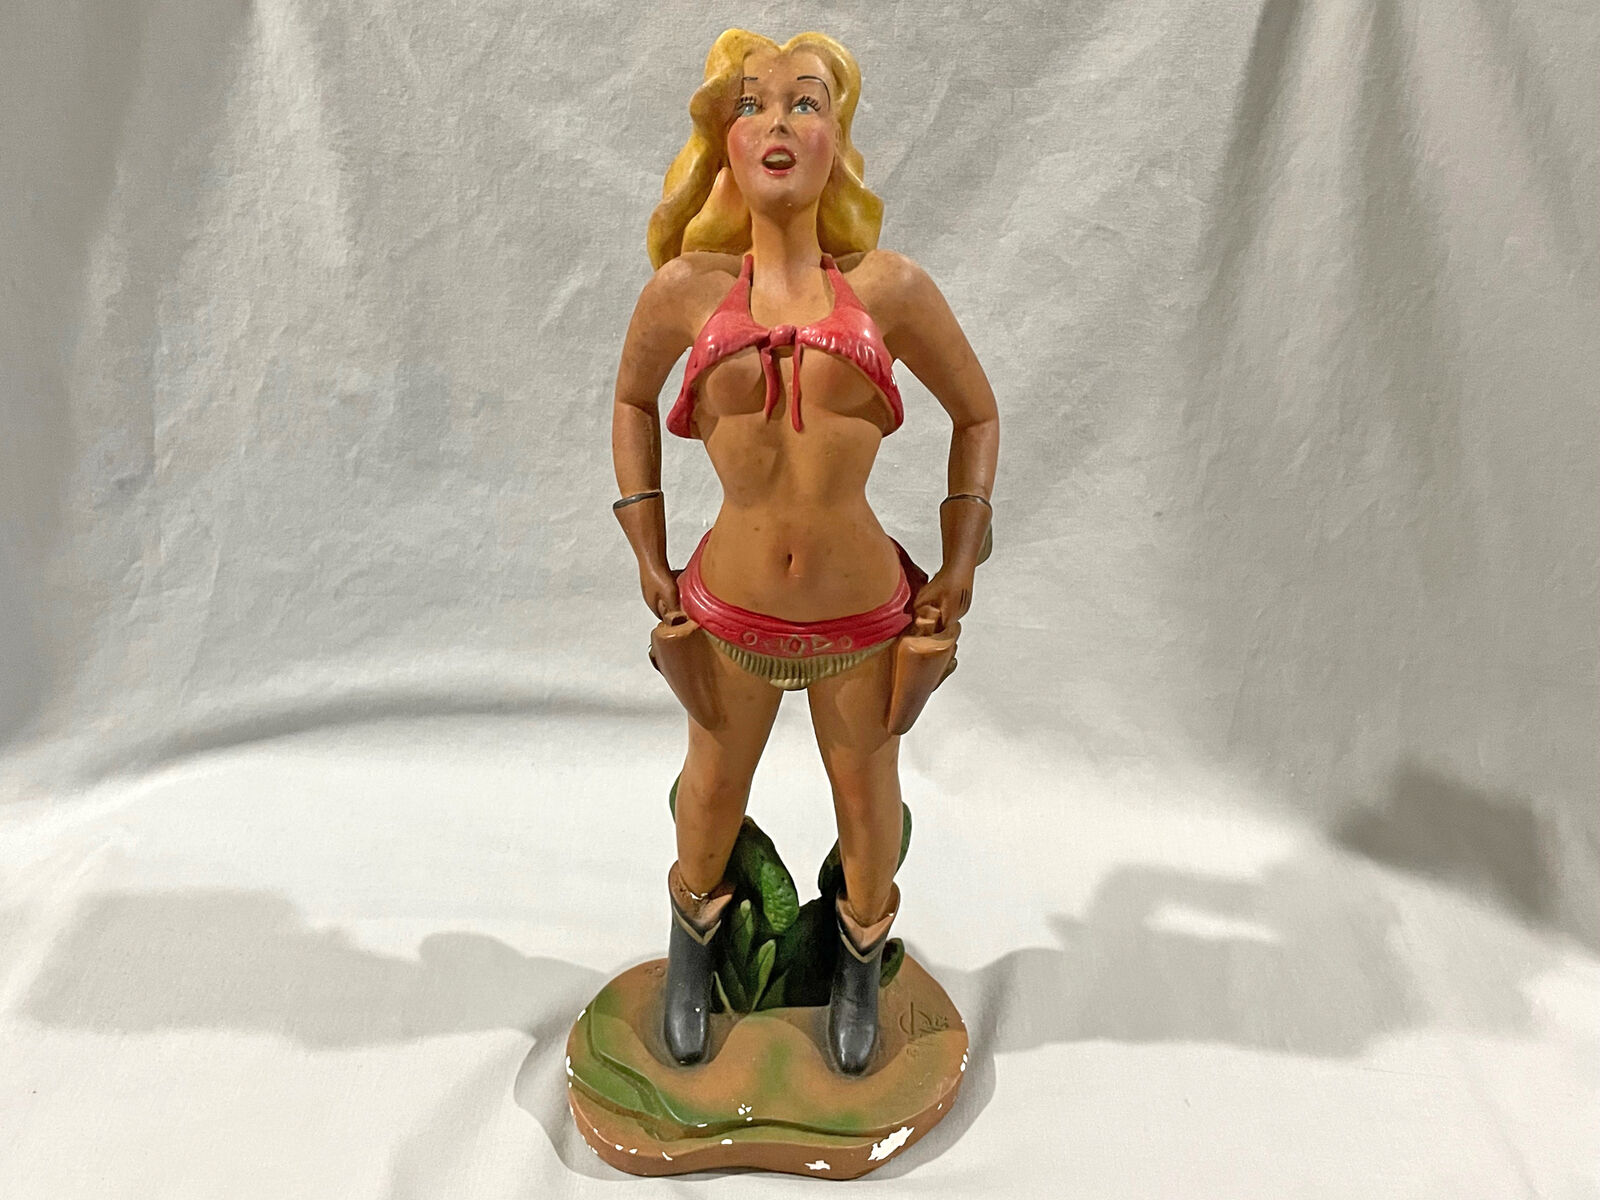 Vintage 1952 GILLETTE PIN-UP COWGIRL CHALKWARE FIGURE - SIGNED